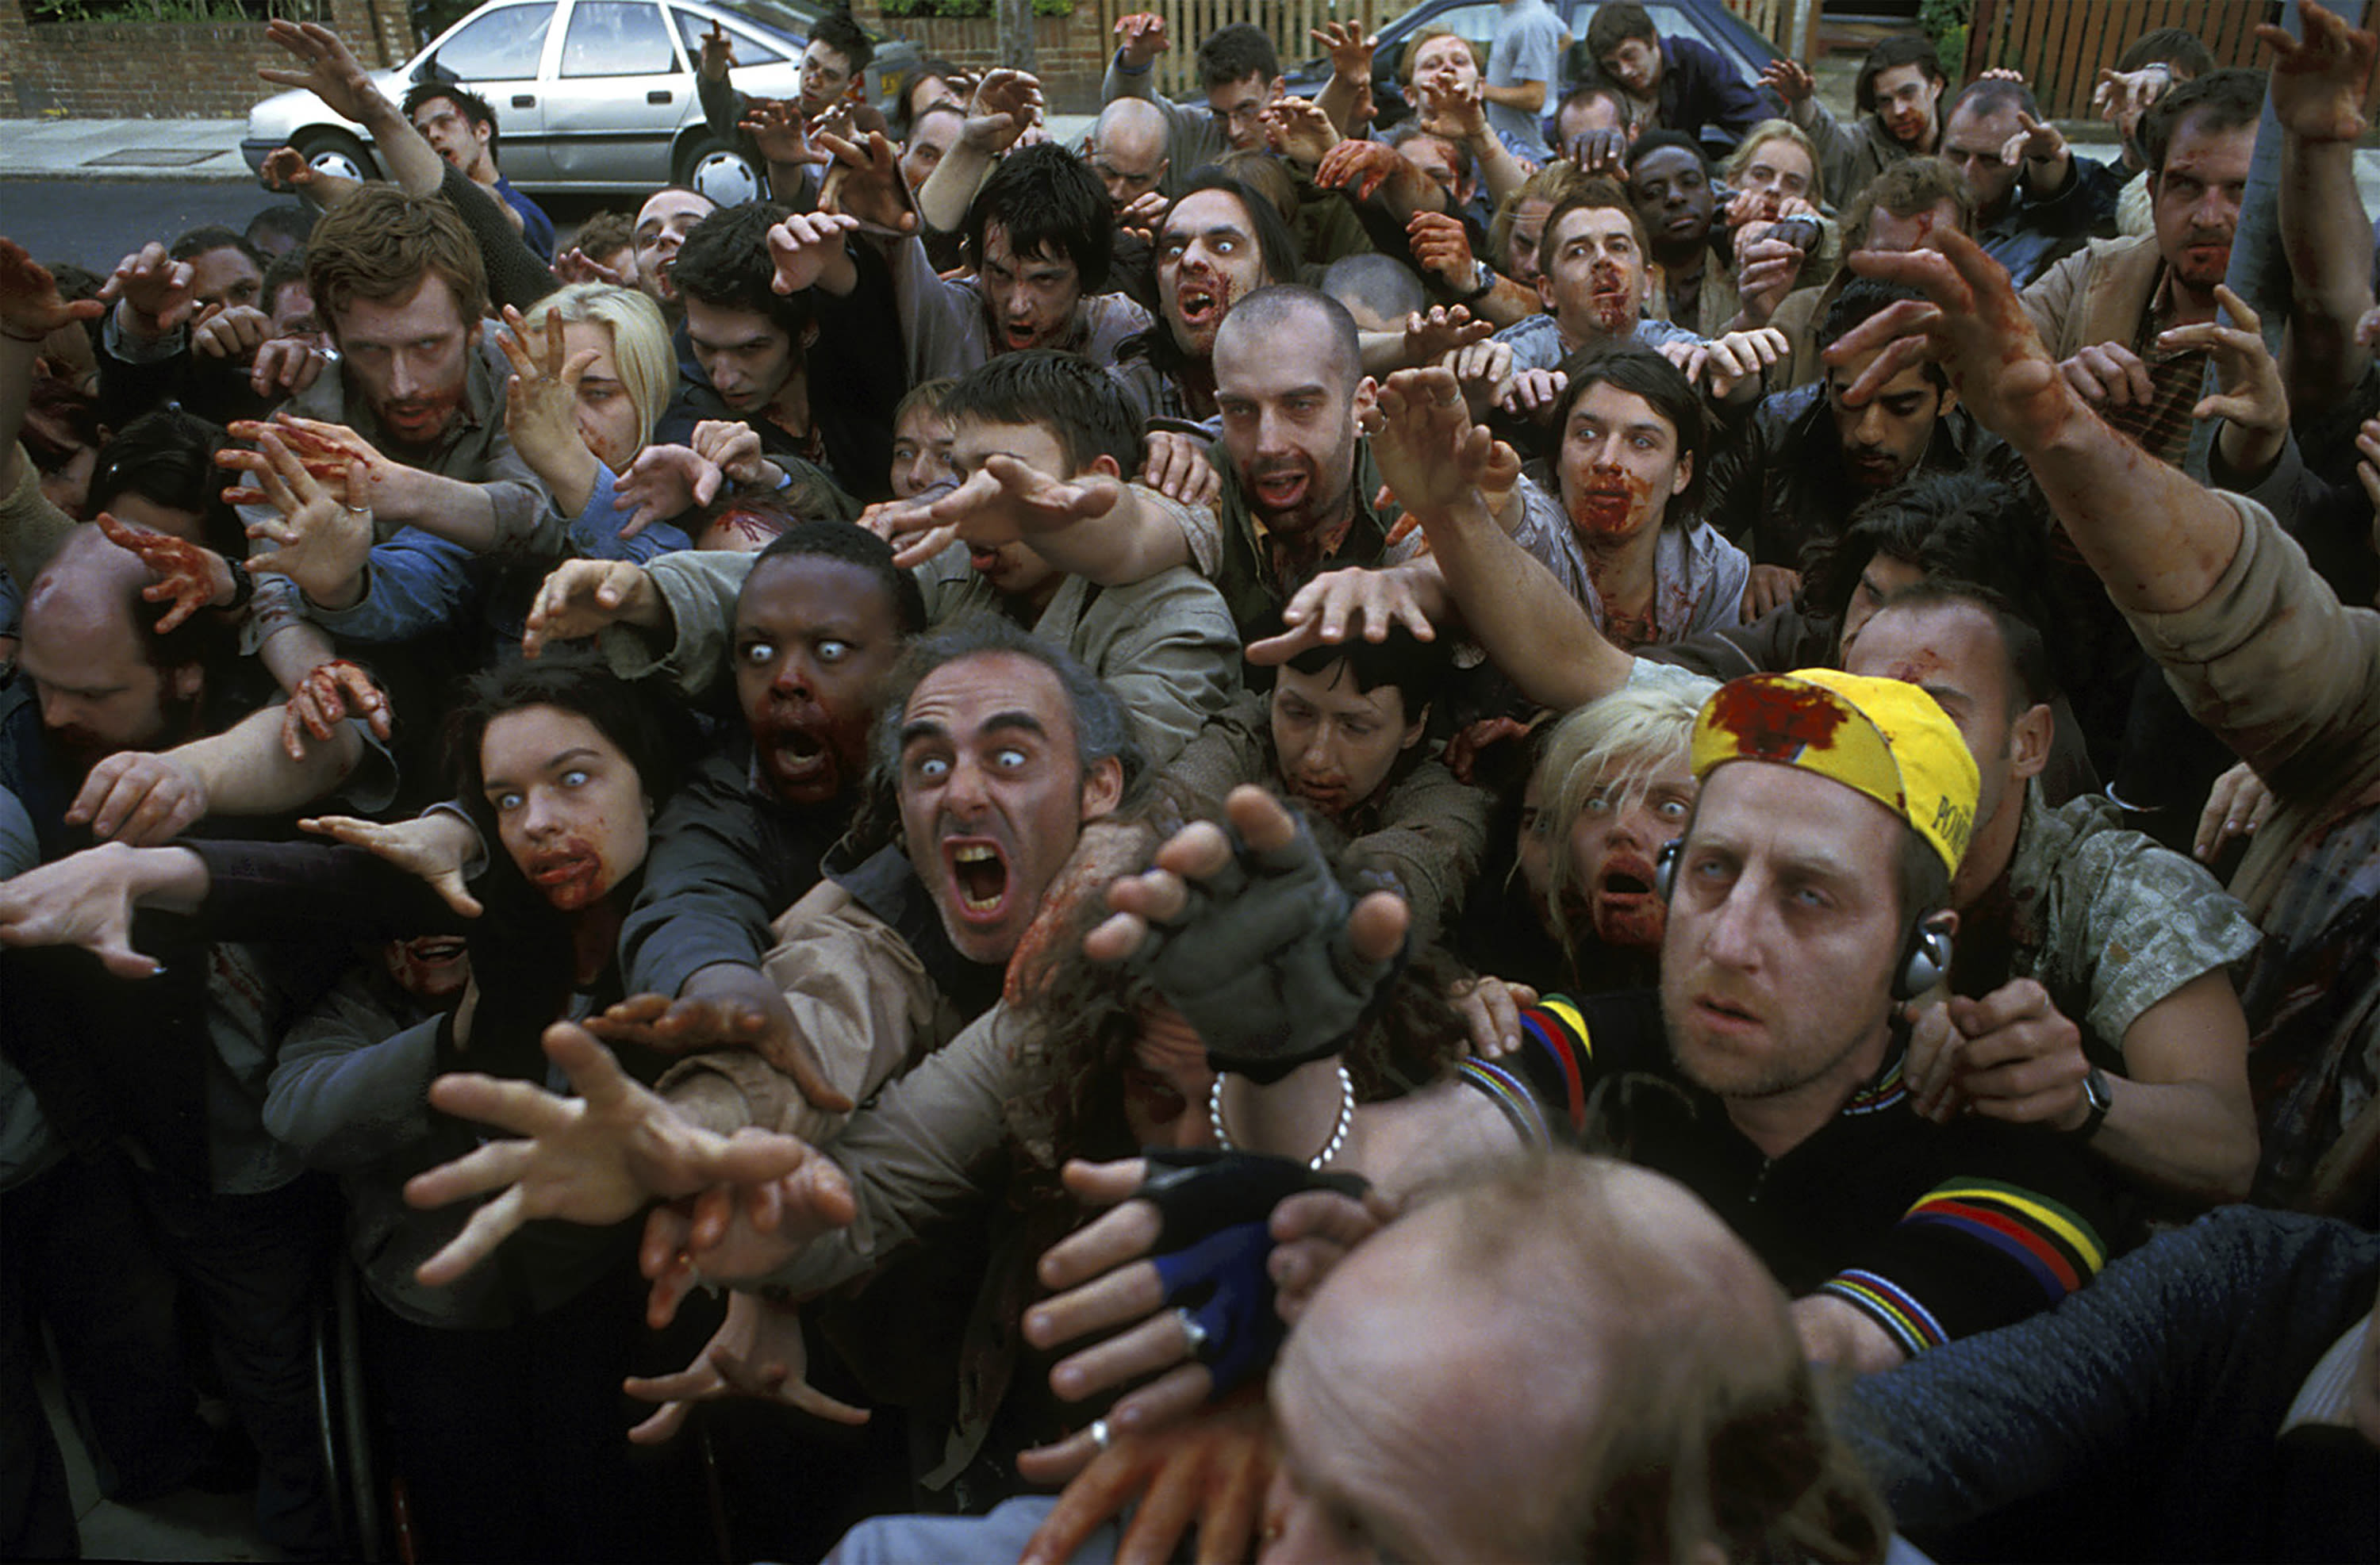 Focus Features To Re-Release ‘Shaun Of The Dead’ On 20th Anniversary Of Edgar Wright Zombie Fest